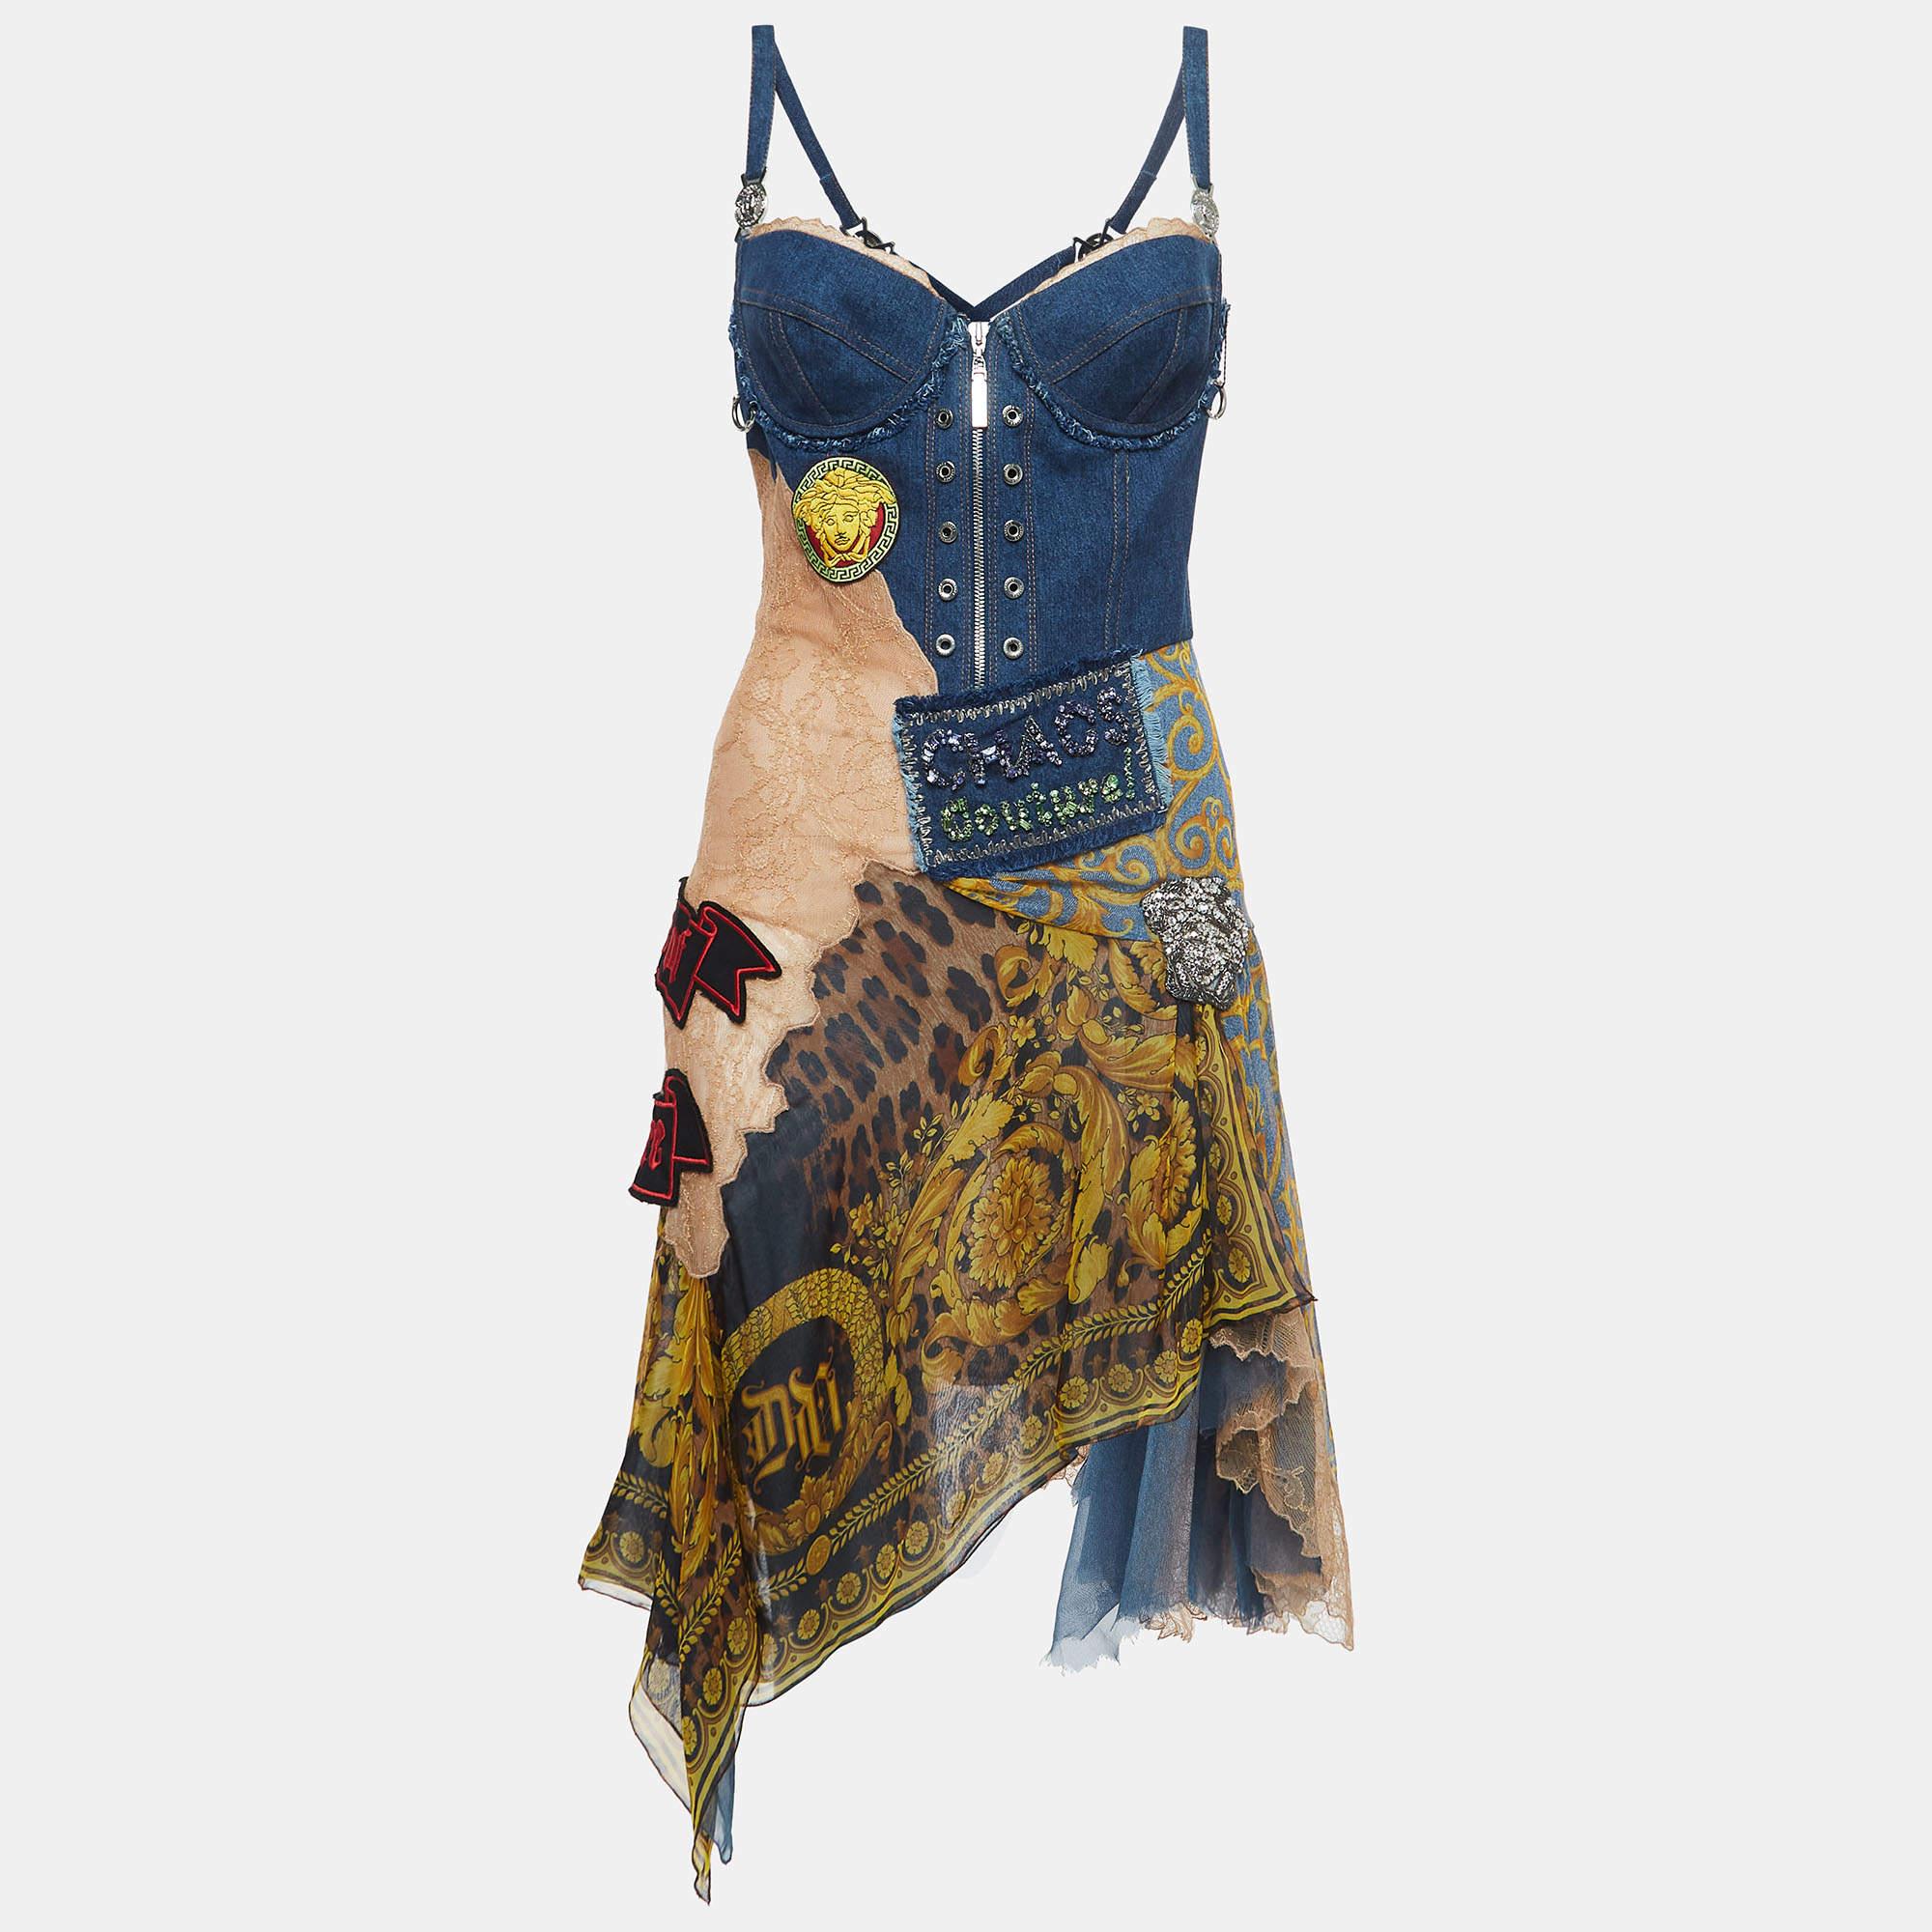 This stunning Versace vintage corset dress is a timeless fusion of elegance and edginess. Crafted with intricate applique detailing, the denim and nylon fabric blend seamlessly, while the asymmetric silhouette adds a modern flair.

Includes: brand